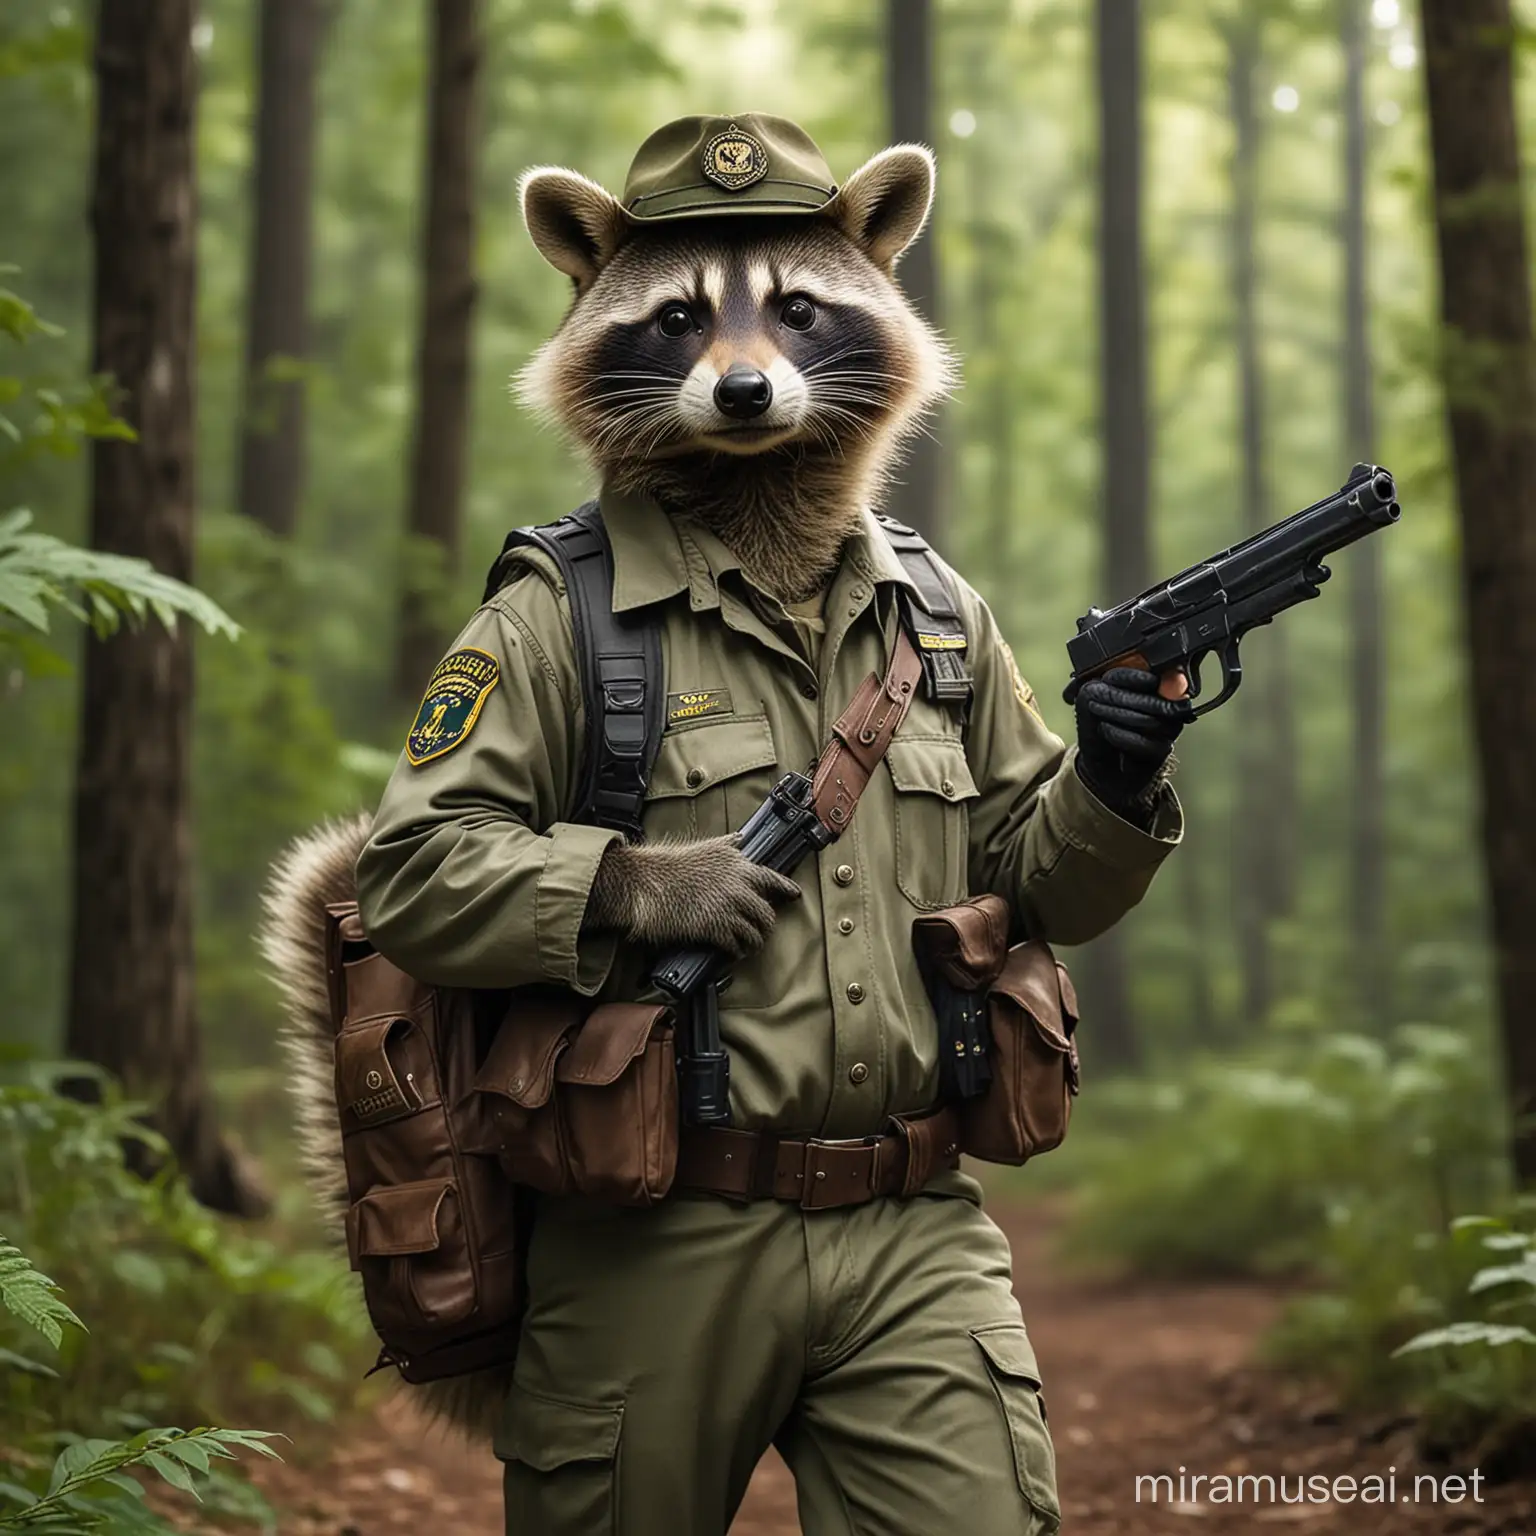 Cute Raccoon Park Ranger in Forest Adventure Outfit with Toy Gun